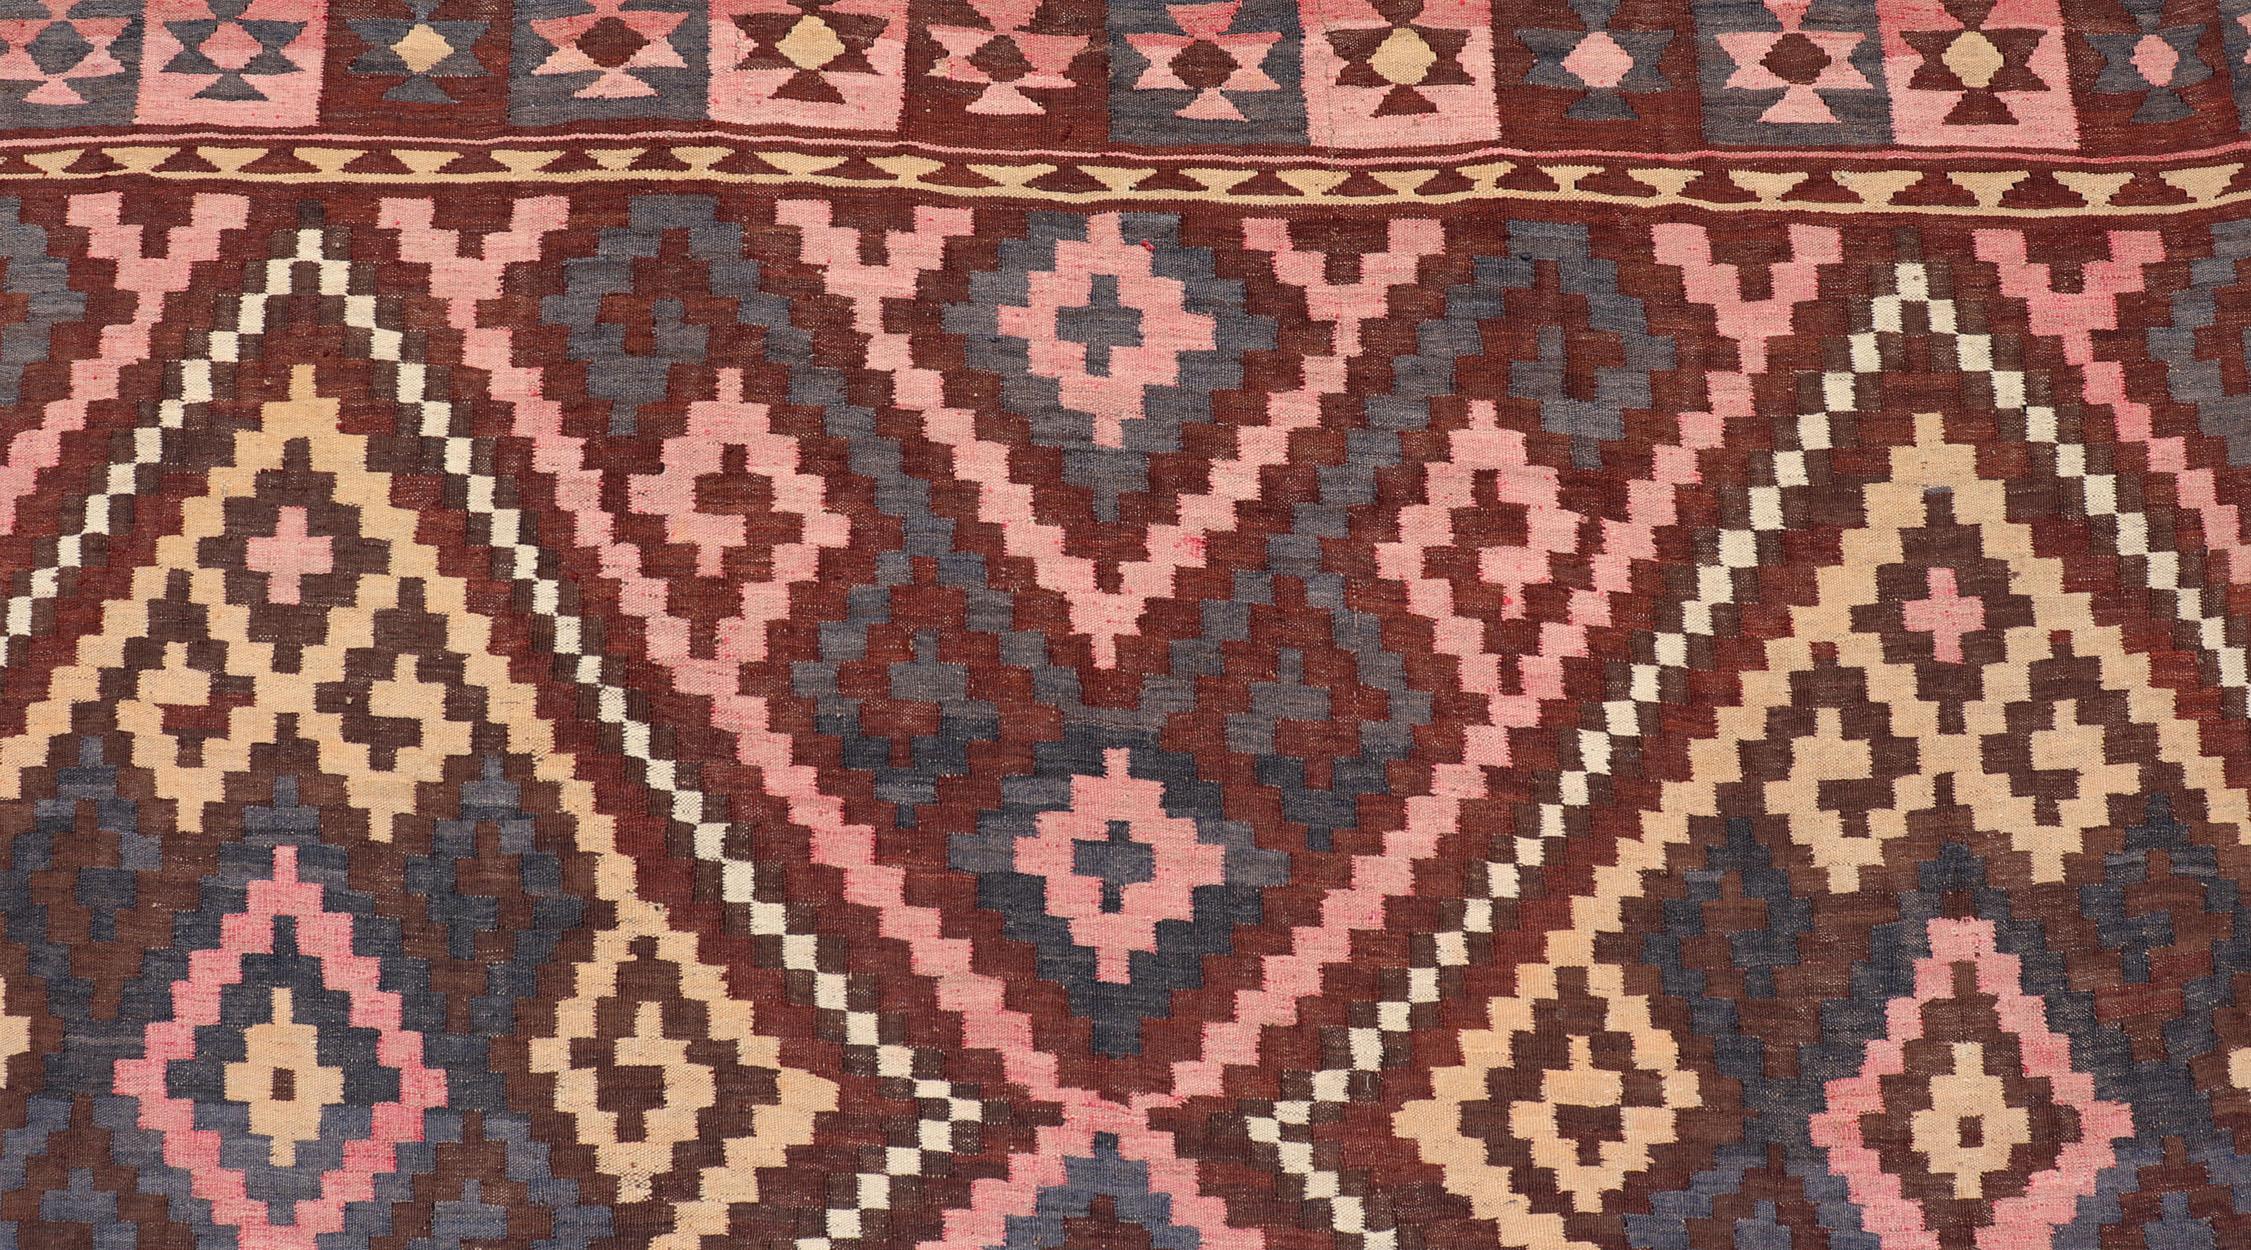 All-Over Hand Woven Geometric Kilim Diamond Design in Brown, Pink, and Ivory For Sale 2